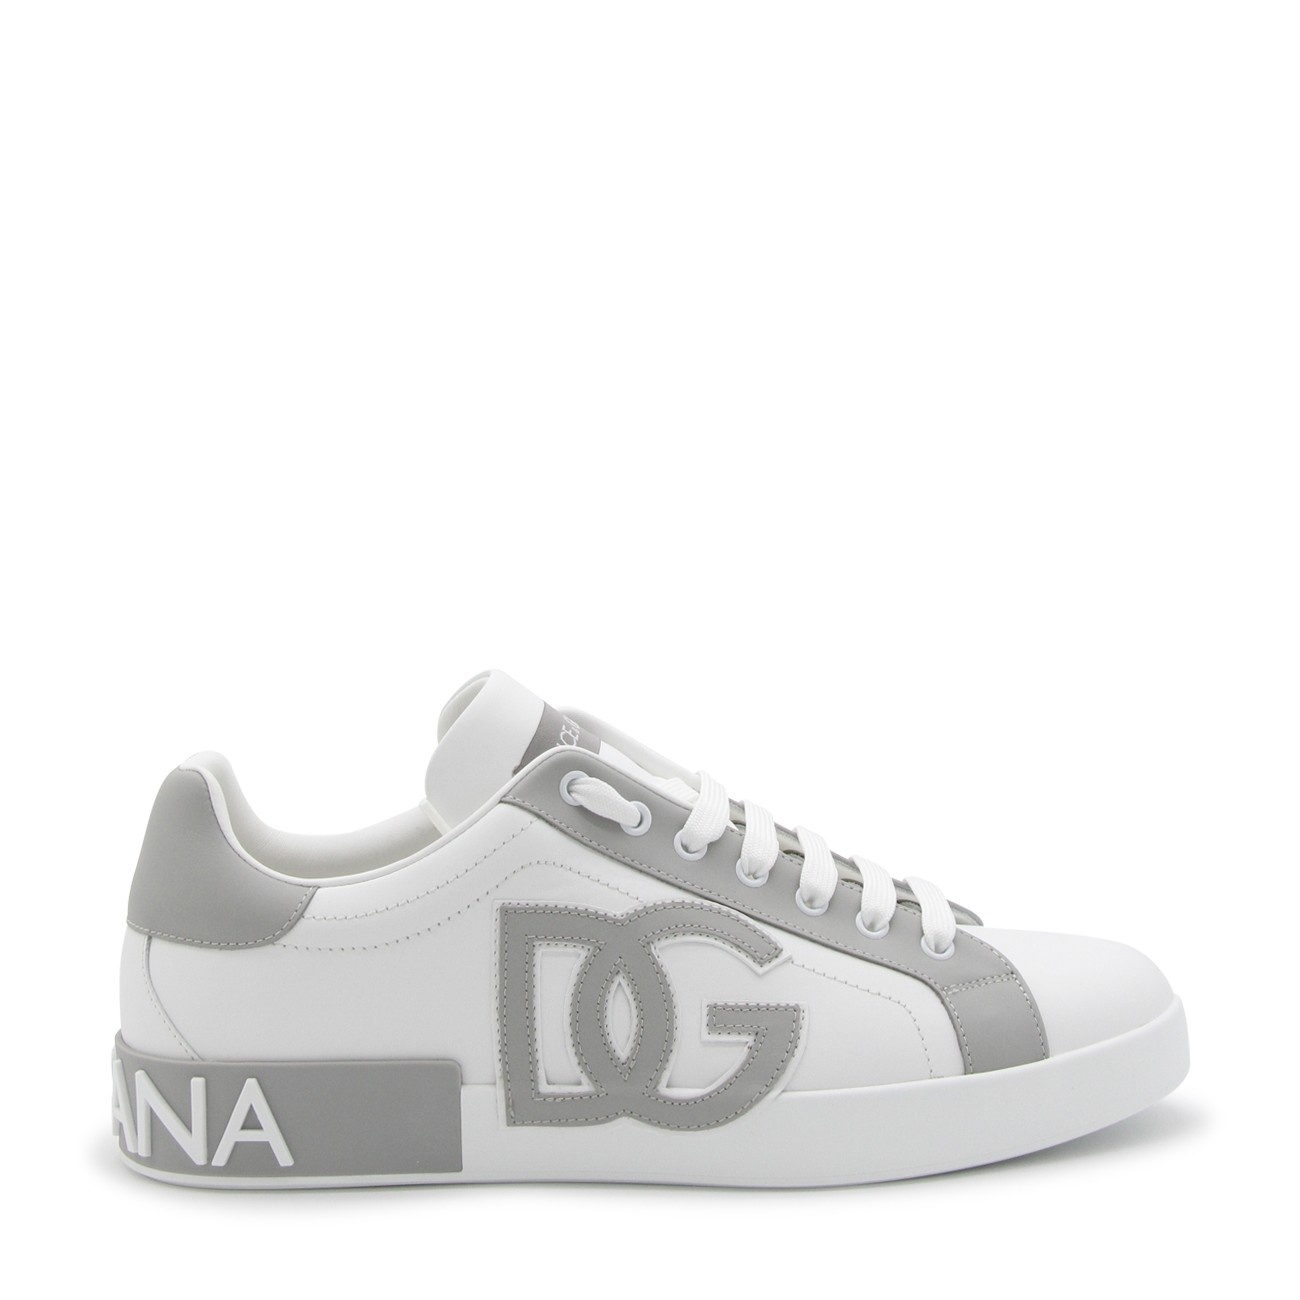 white and grey leather sneakers - 1